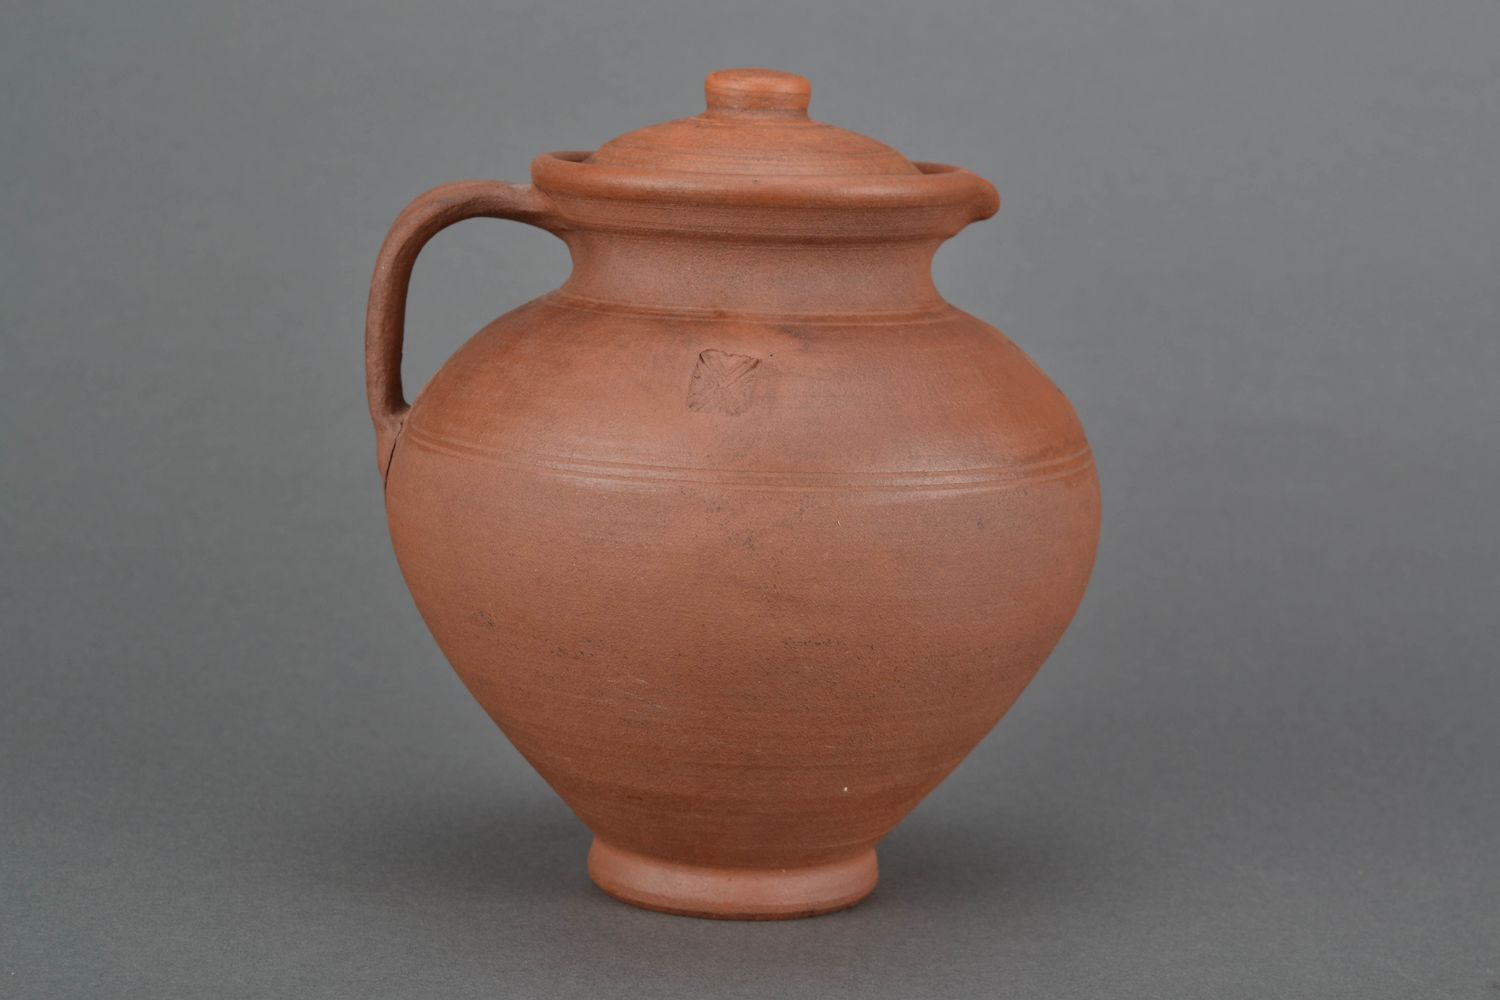 45 oz ceramic terracotta pitcher jar with a lid and handle 2 lb photo 1